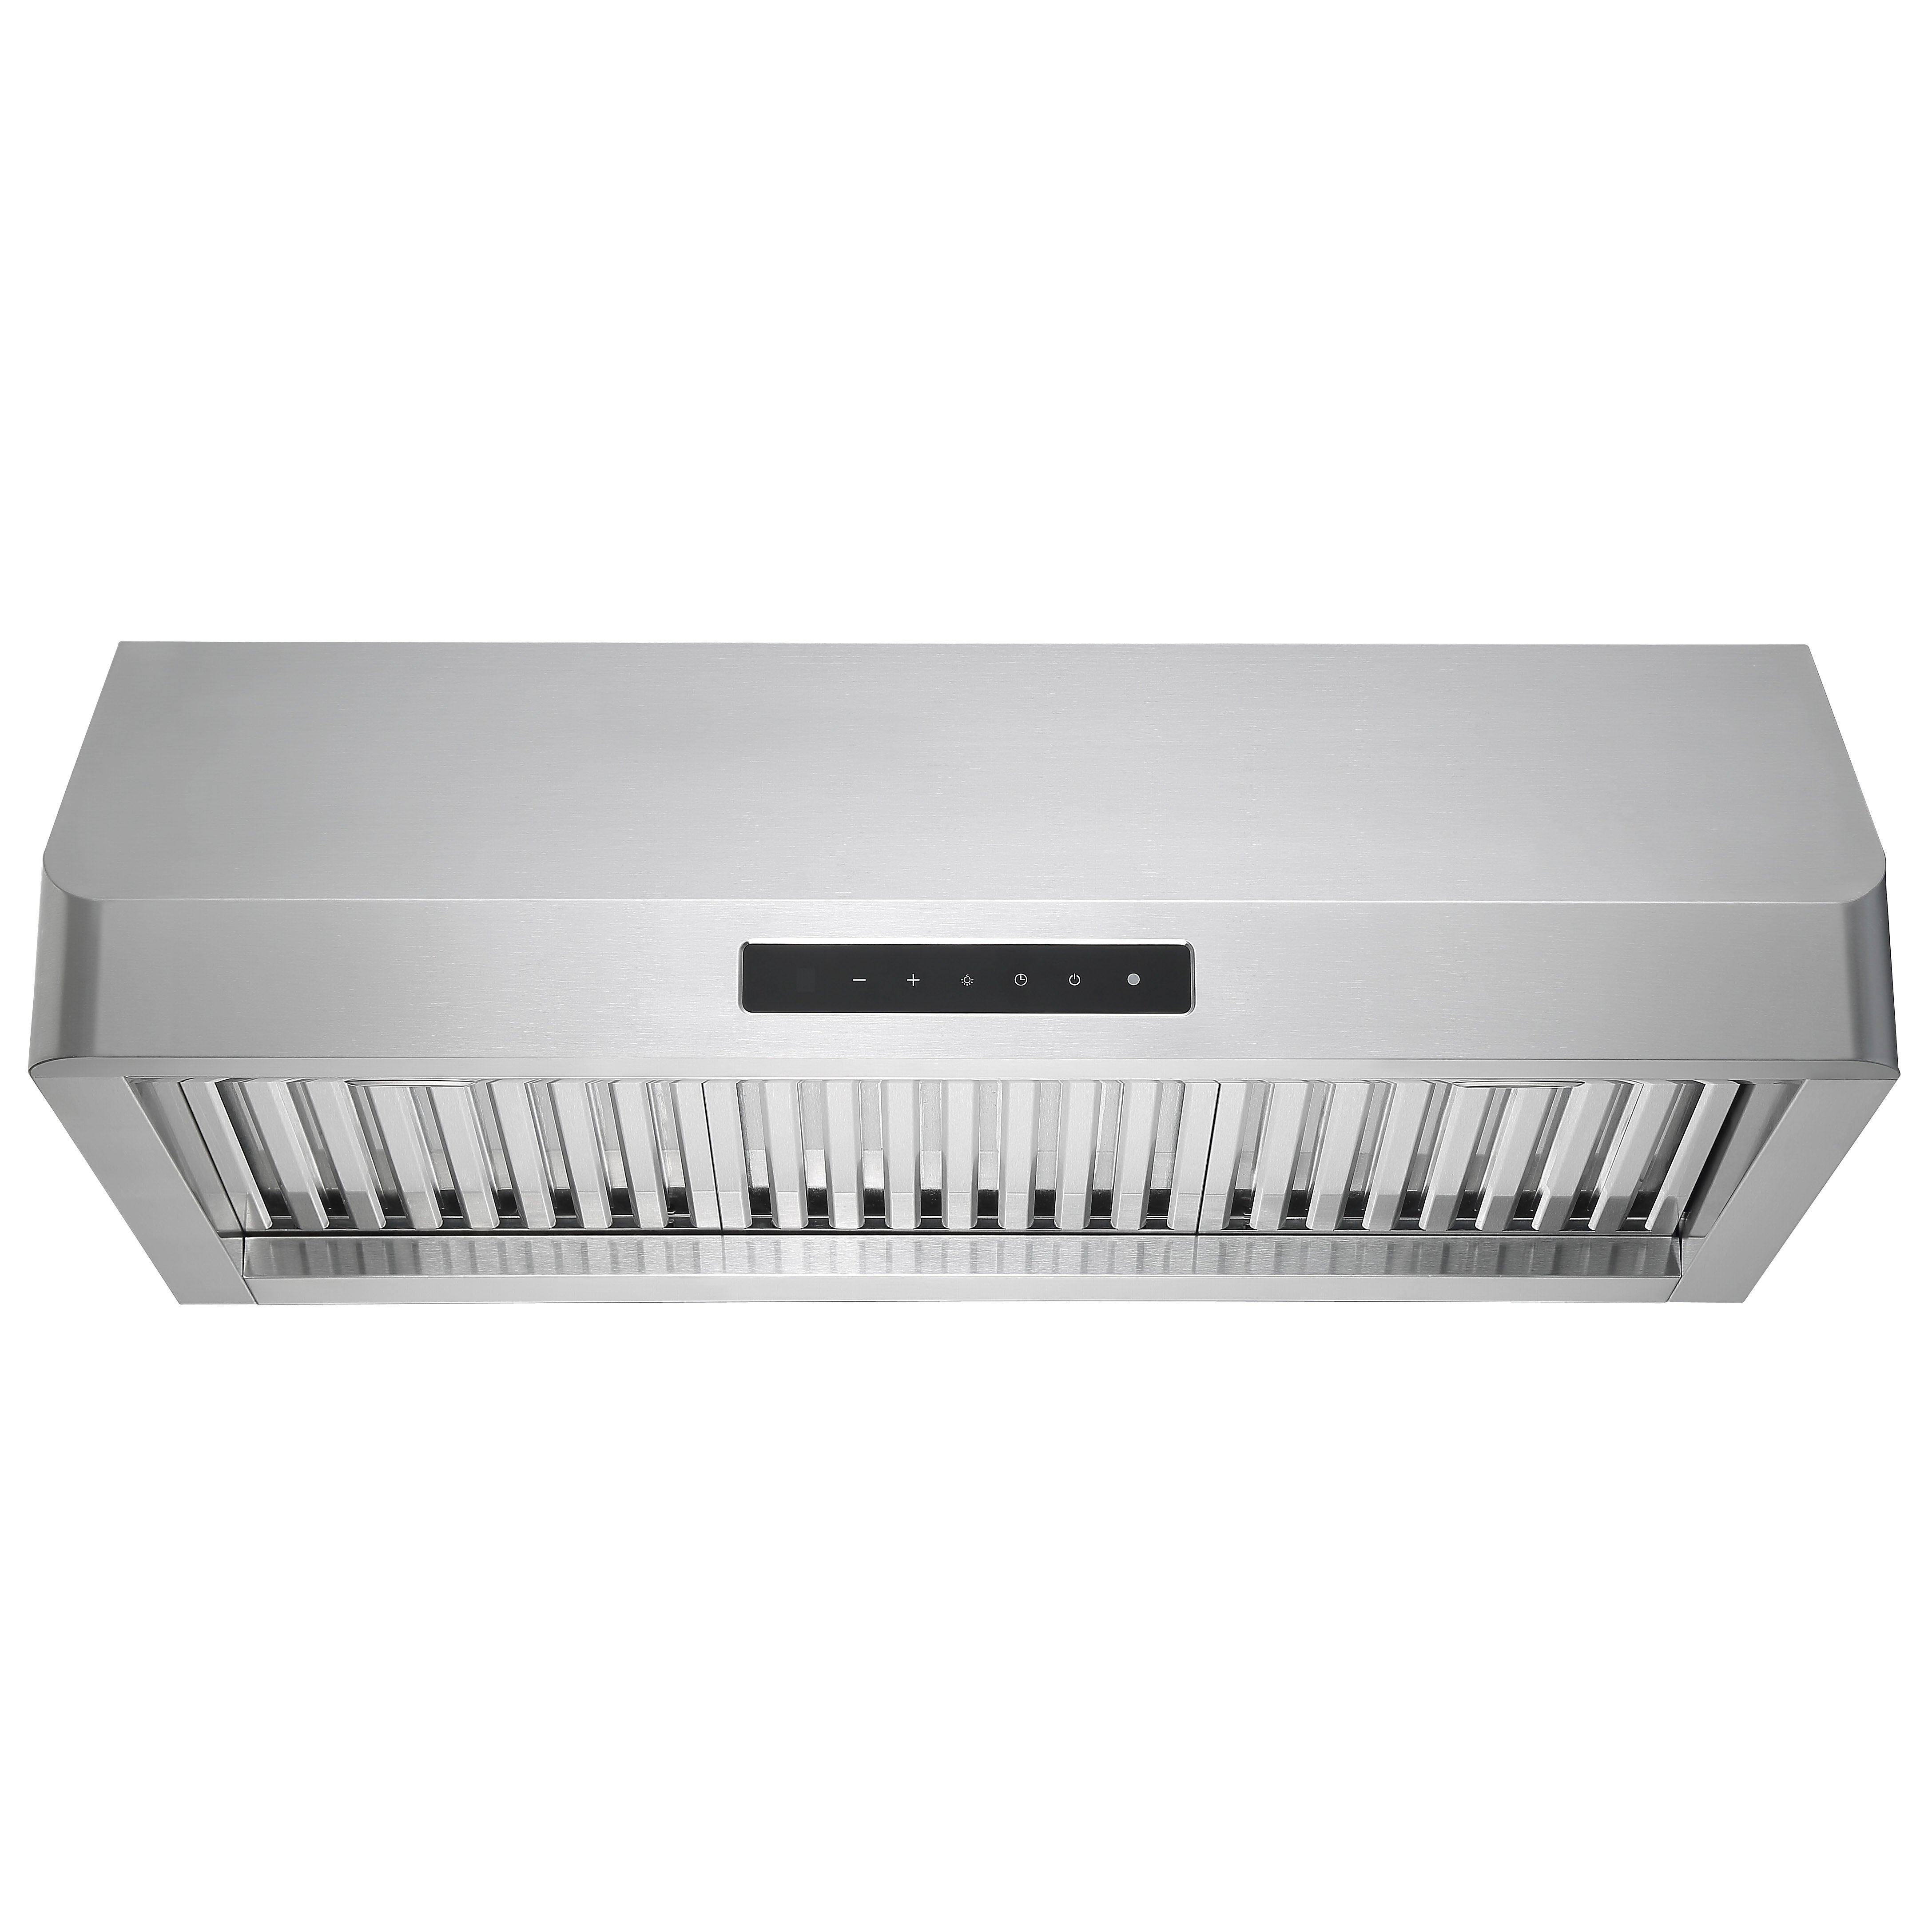 Ancona AN-1257 36 in. Pro Series Turbo Stainless Steel Under Cabinet Range Hood with Night Light Feature